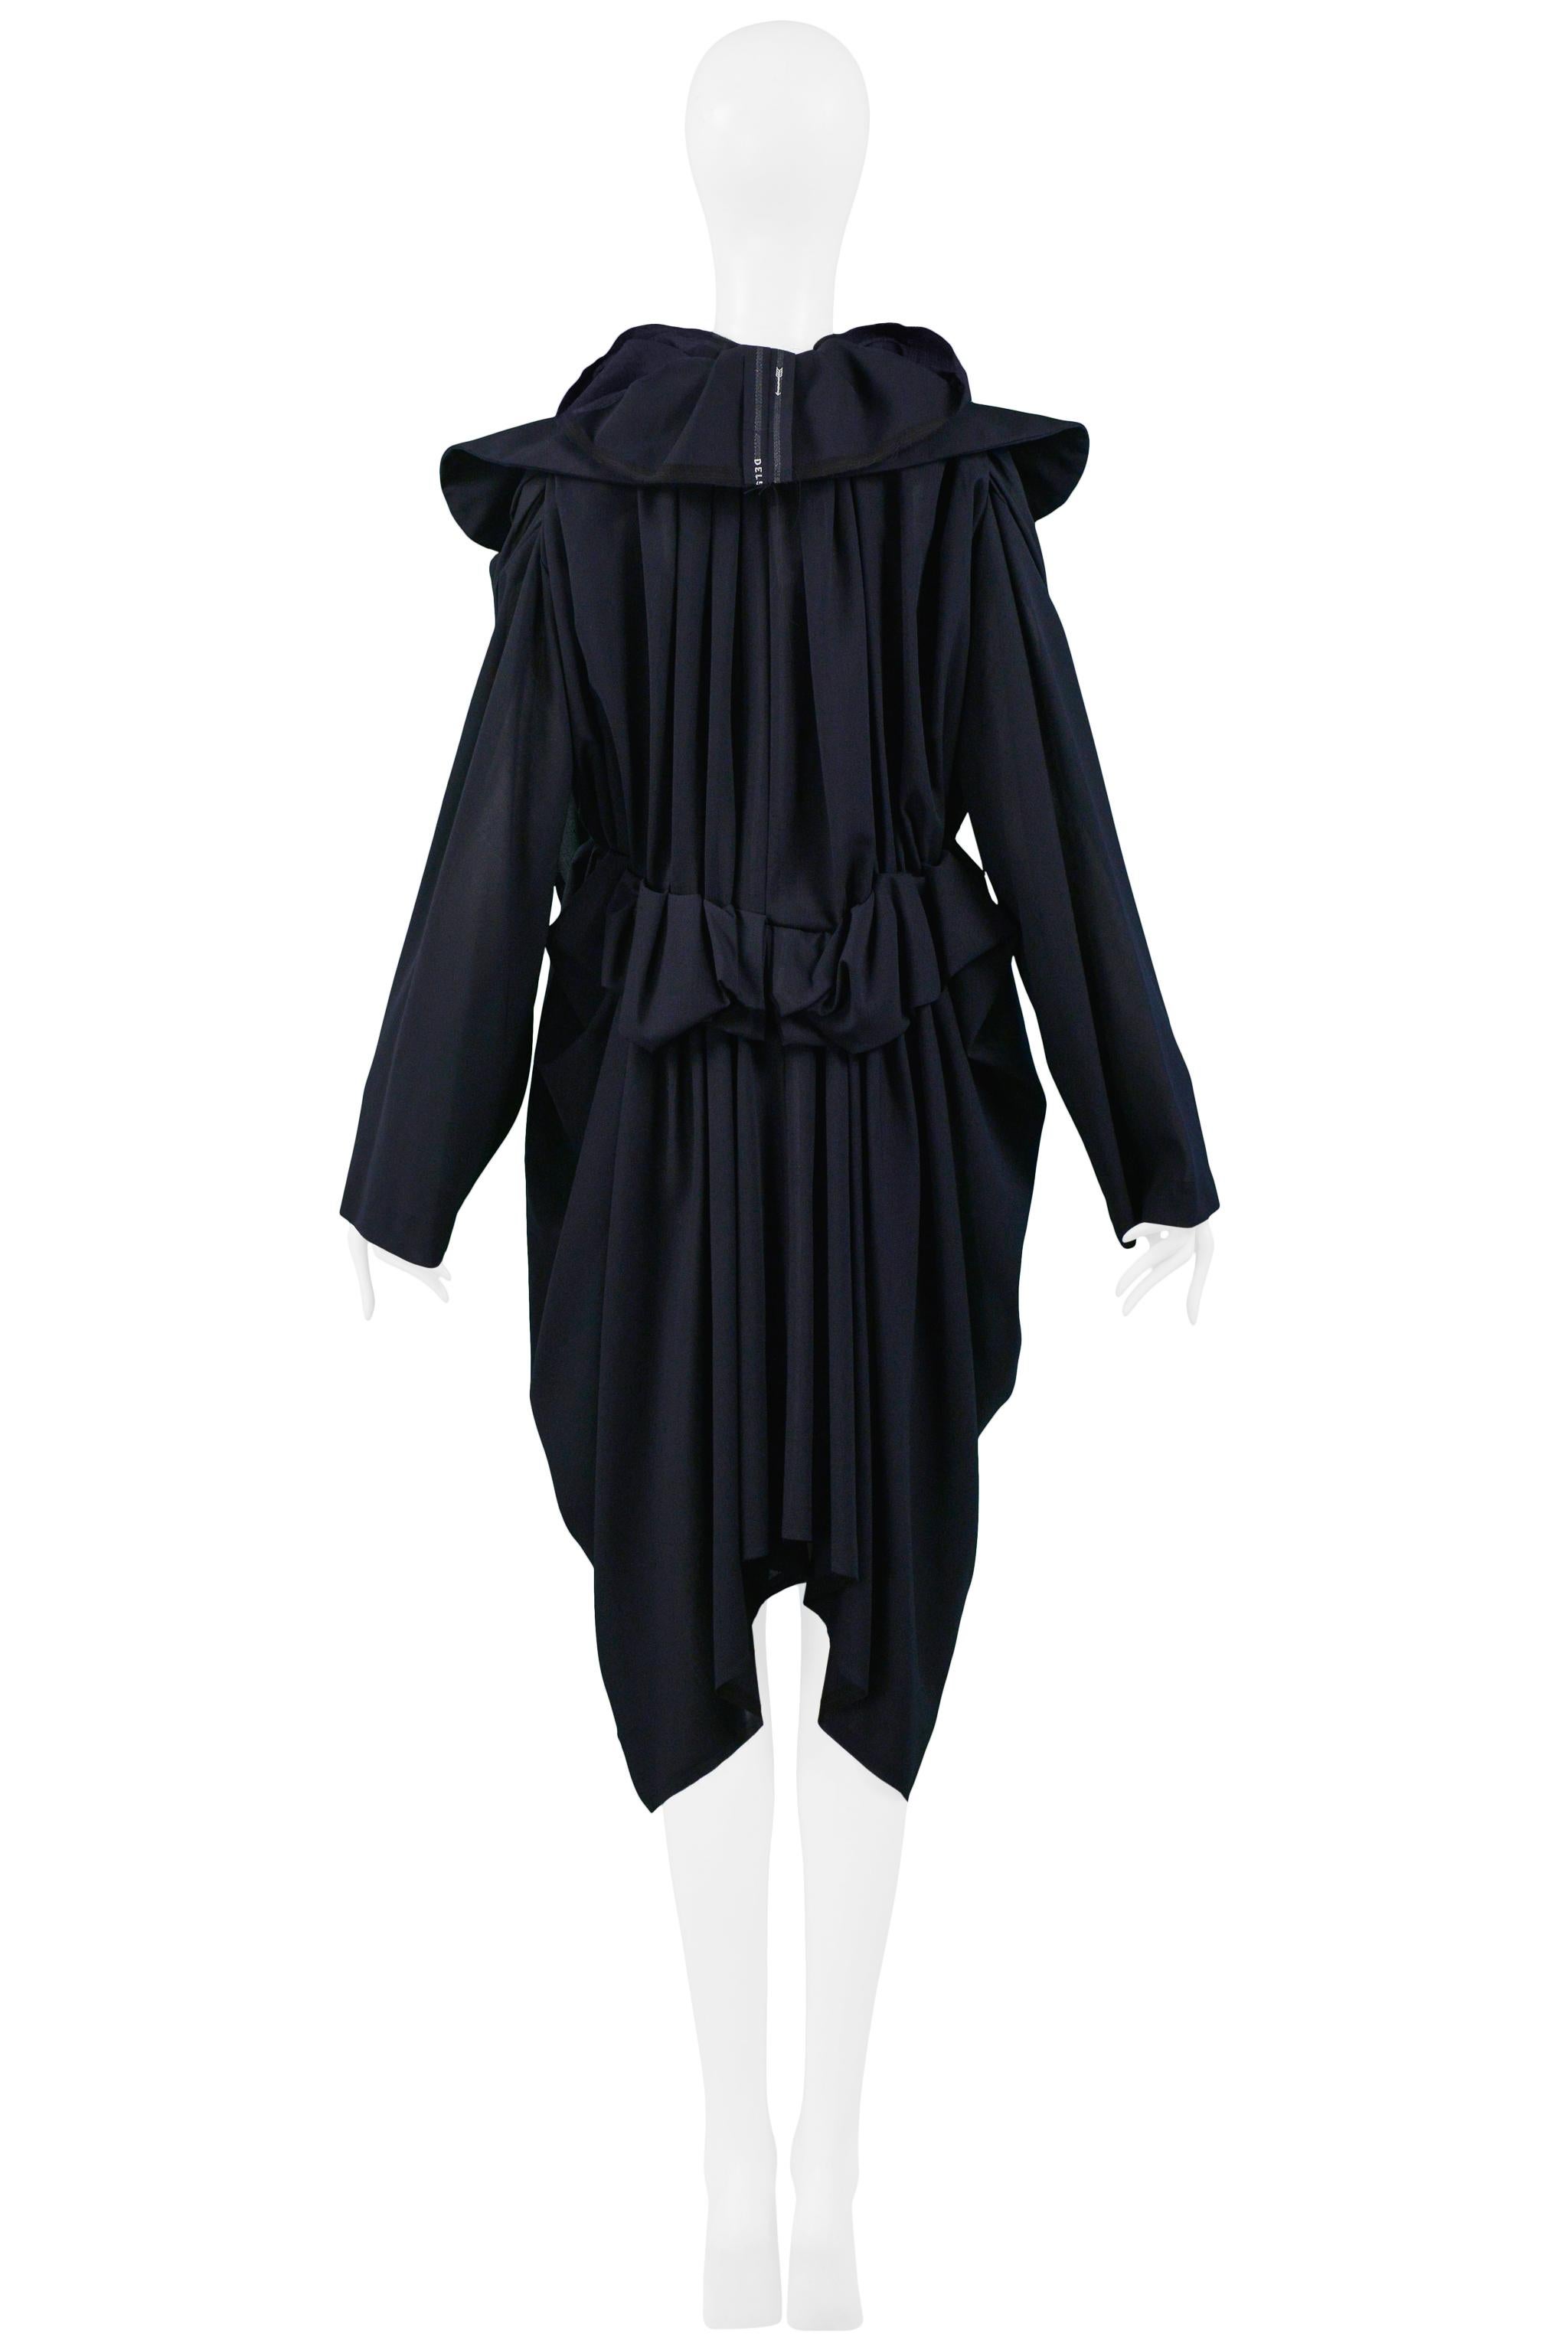 Comme Des Garcons Navy Deconstructed Selvedge Coat 2005 In Excellent Condition For Sale In Los Angeles, CA